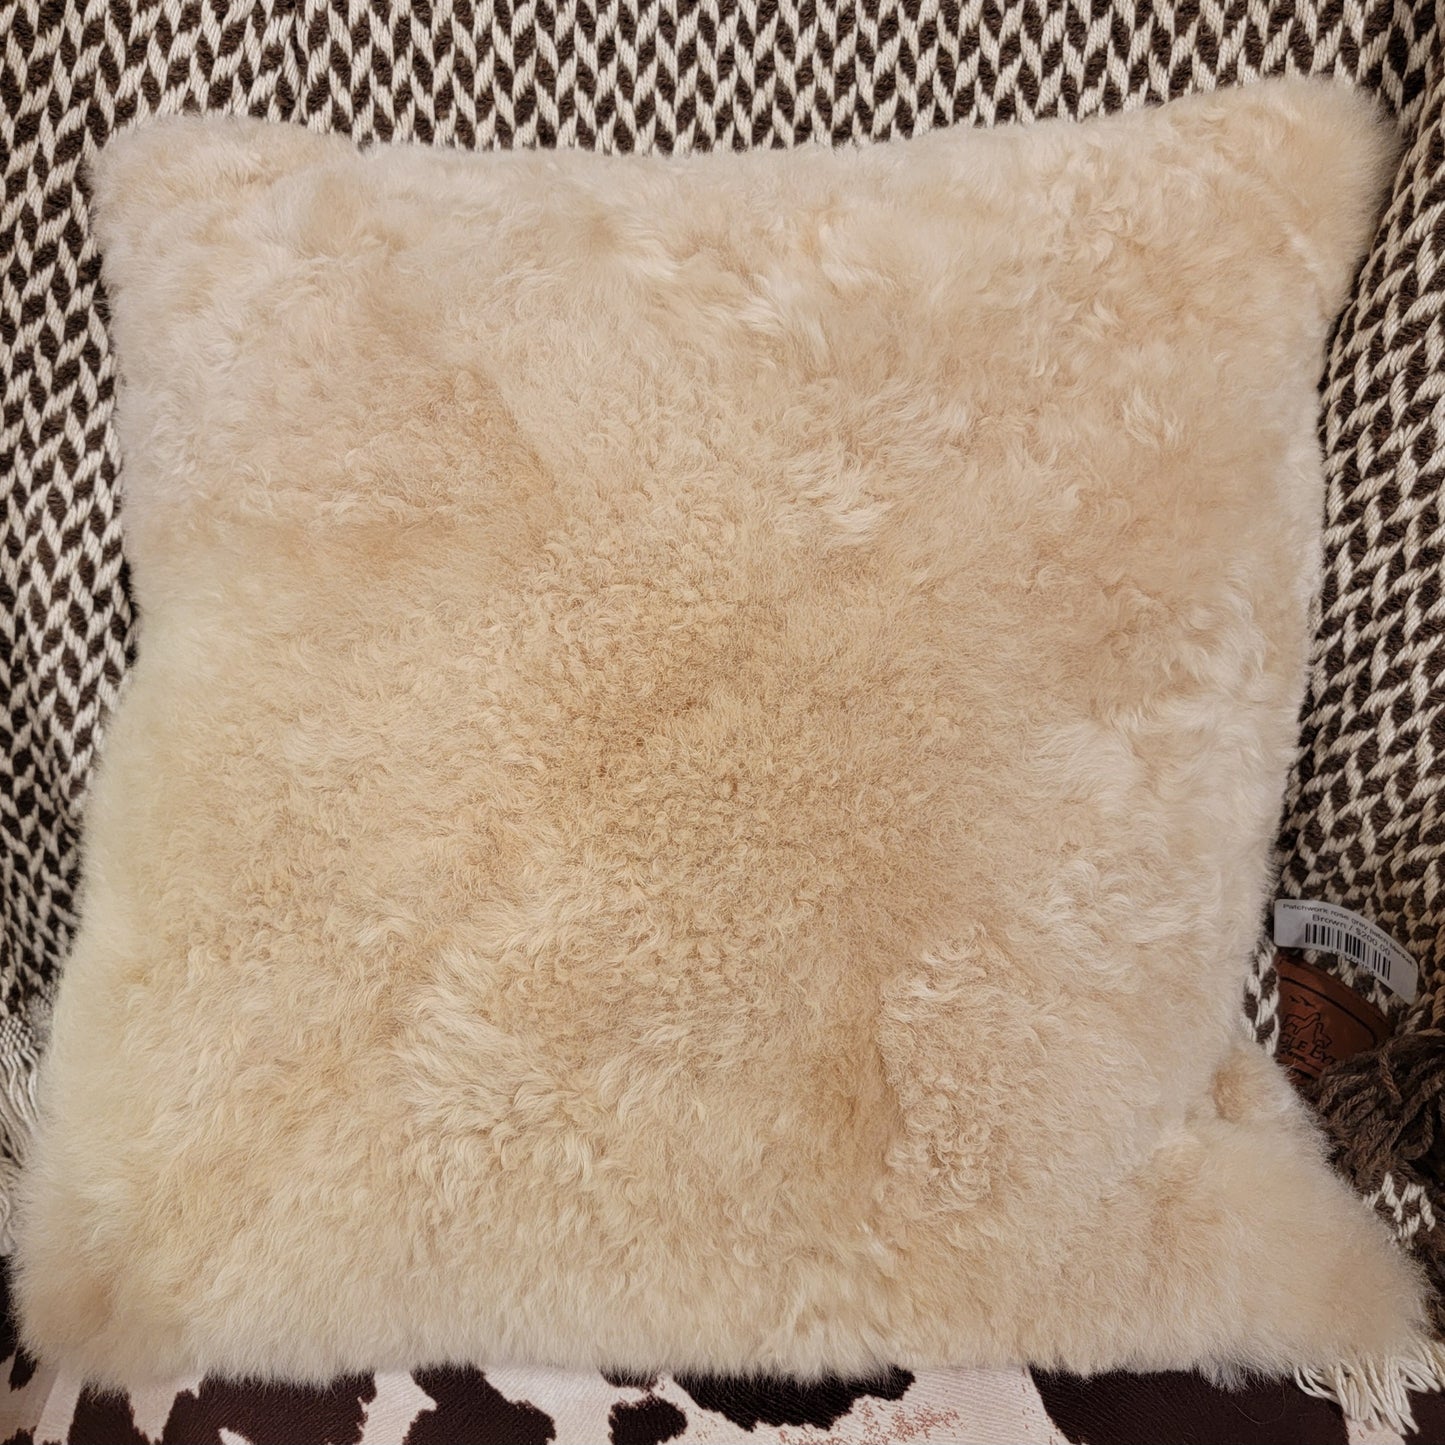 100%  baby alpaca fluffy pillow/covers